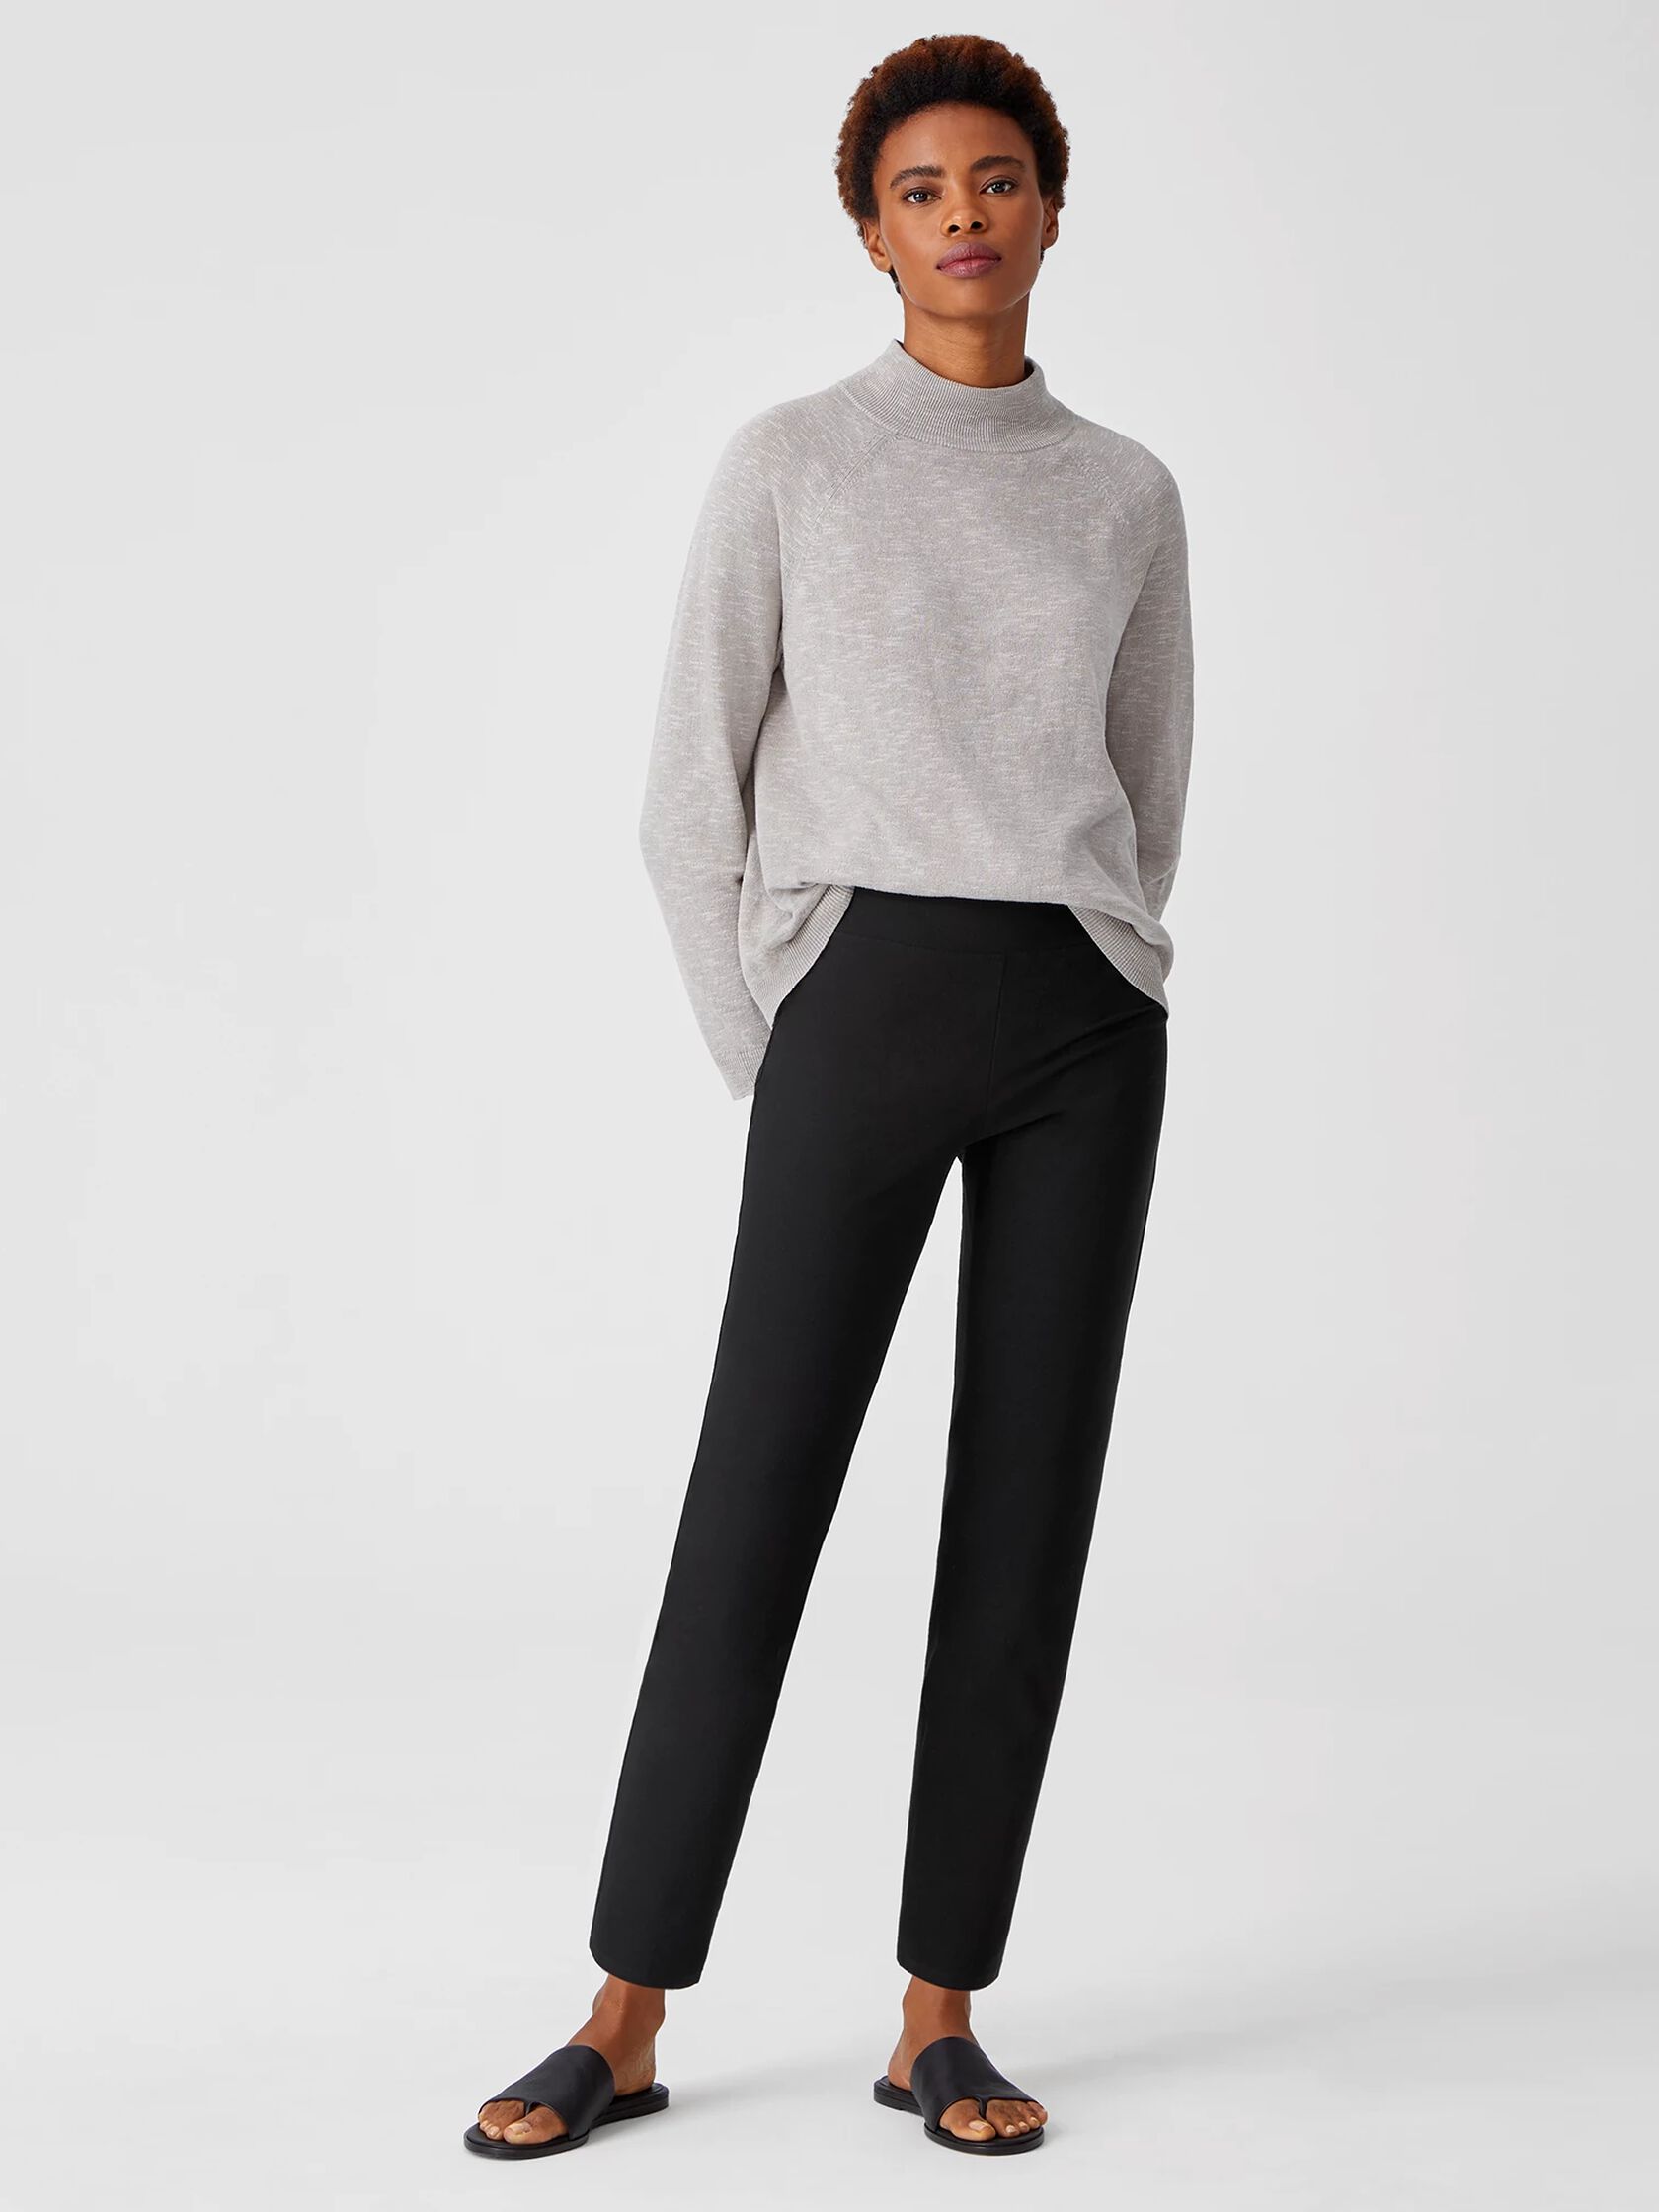 Eileen Fisher Washable Stretch Crepe High Waisted Pant - Black • Price »